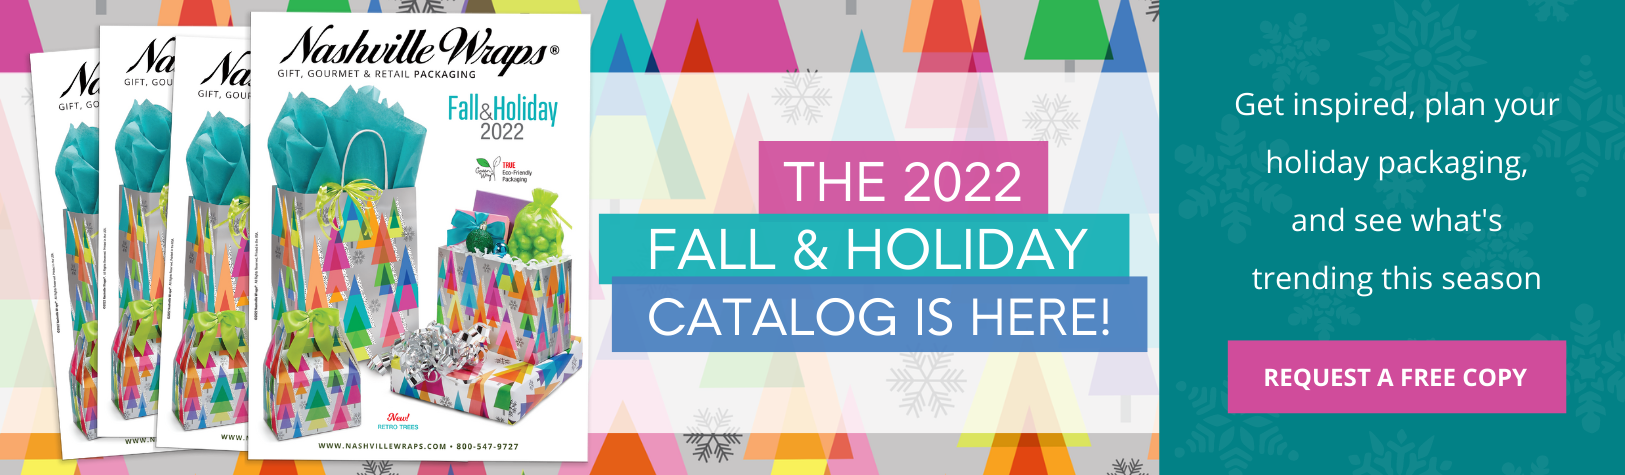 The NEW Fall and Holiday Catalog is available now - Request your copy